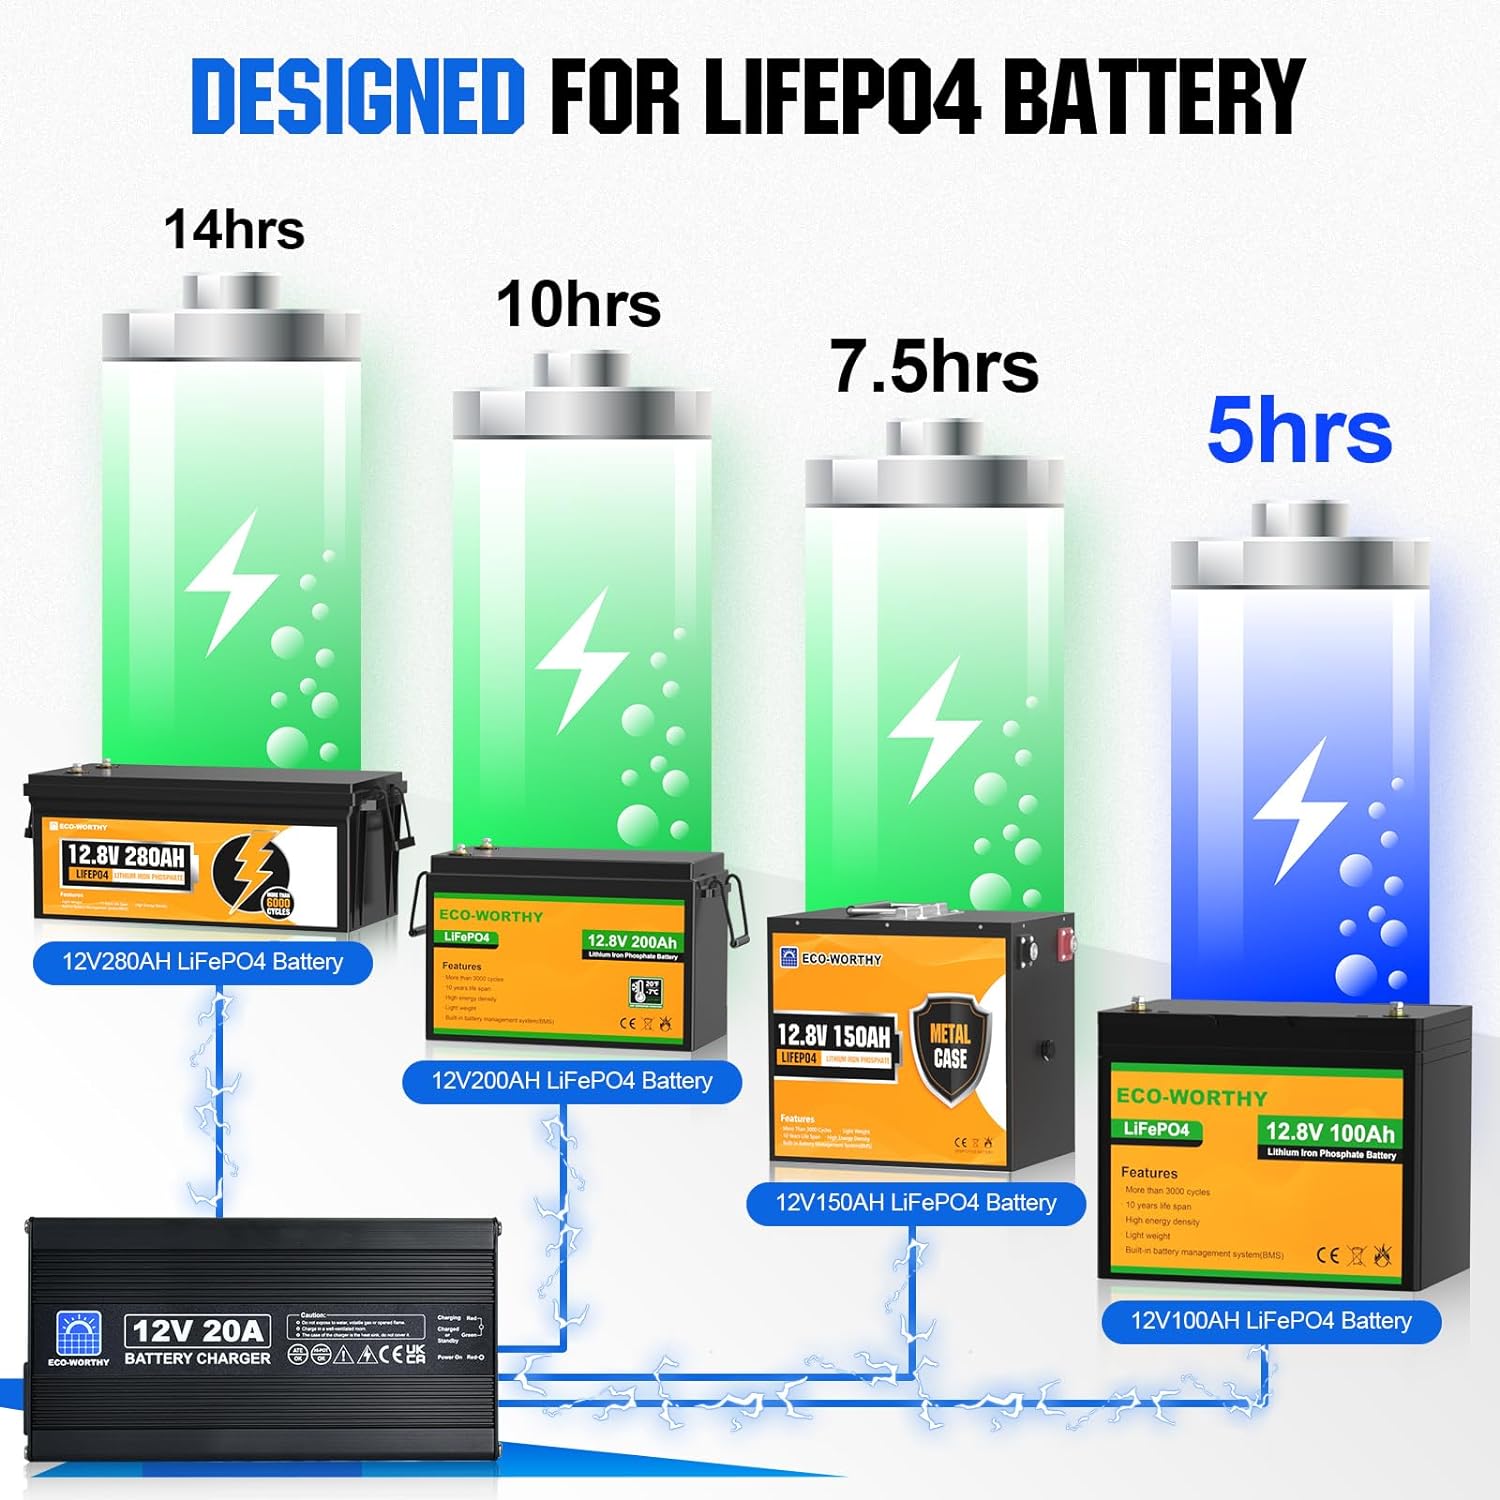 ECO-WORTHY 20A Battery Charger 12V Lithium LifePO4 Battery Charger Review